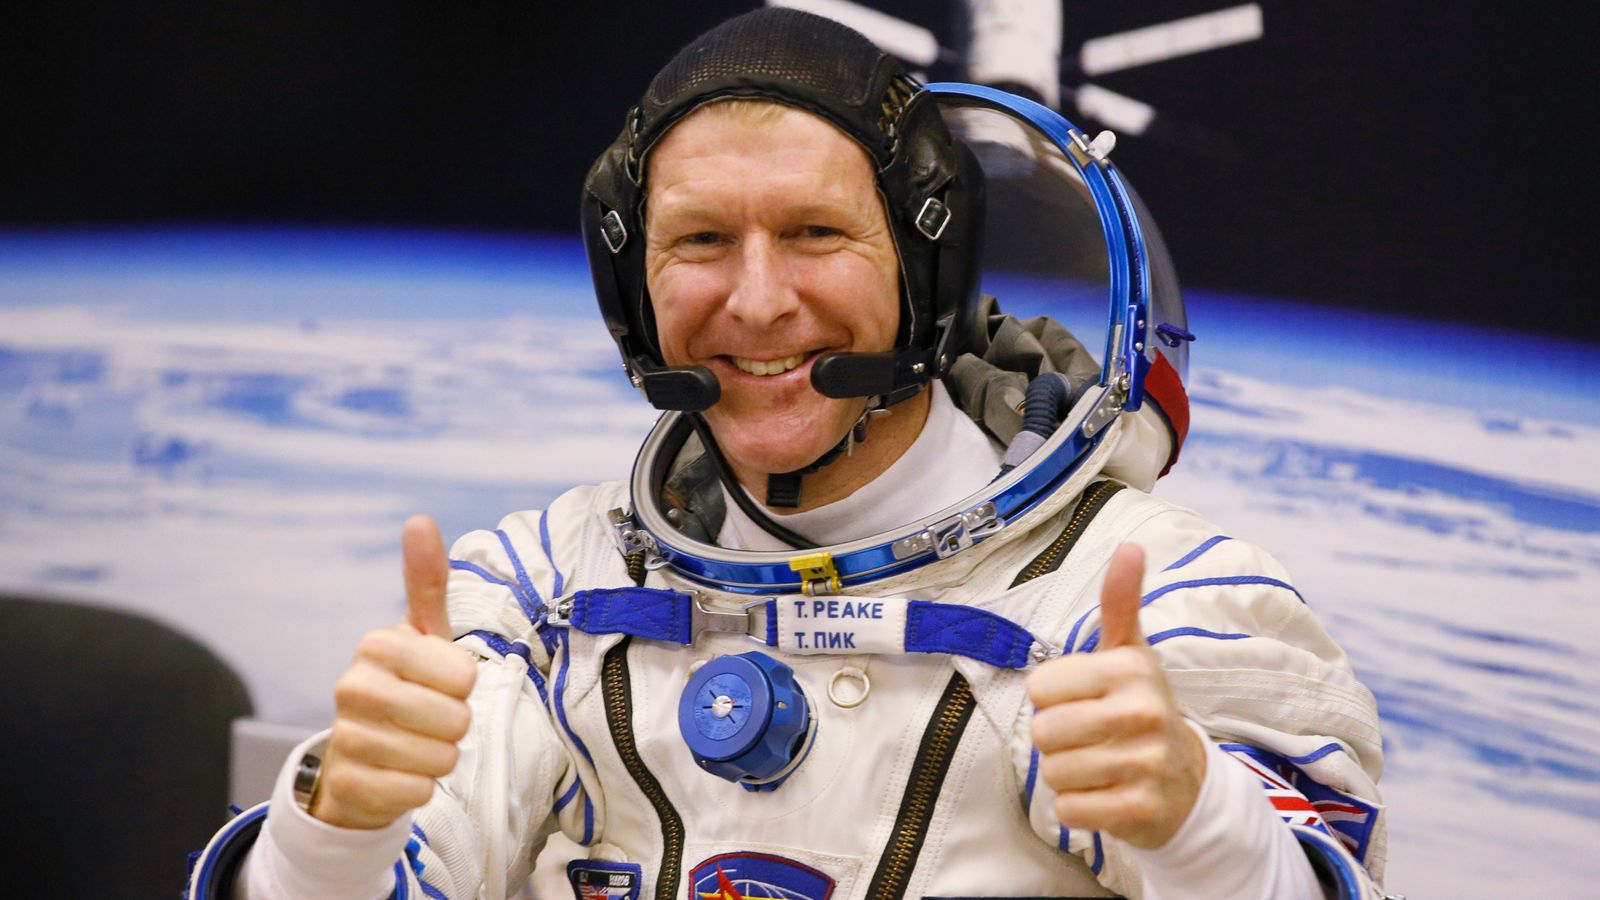 history-making astronaut tim peake hopes to head back to space with all-british mission